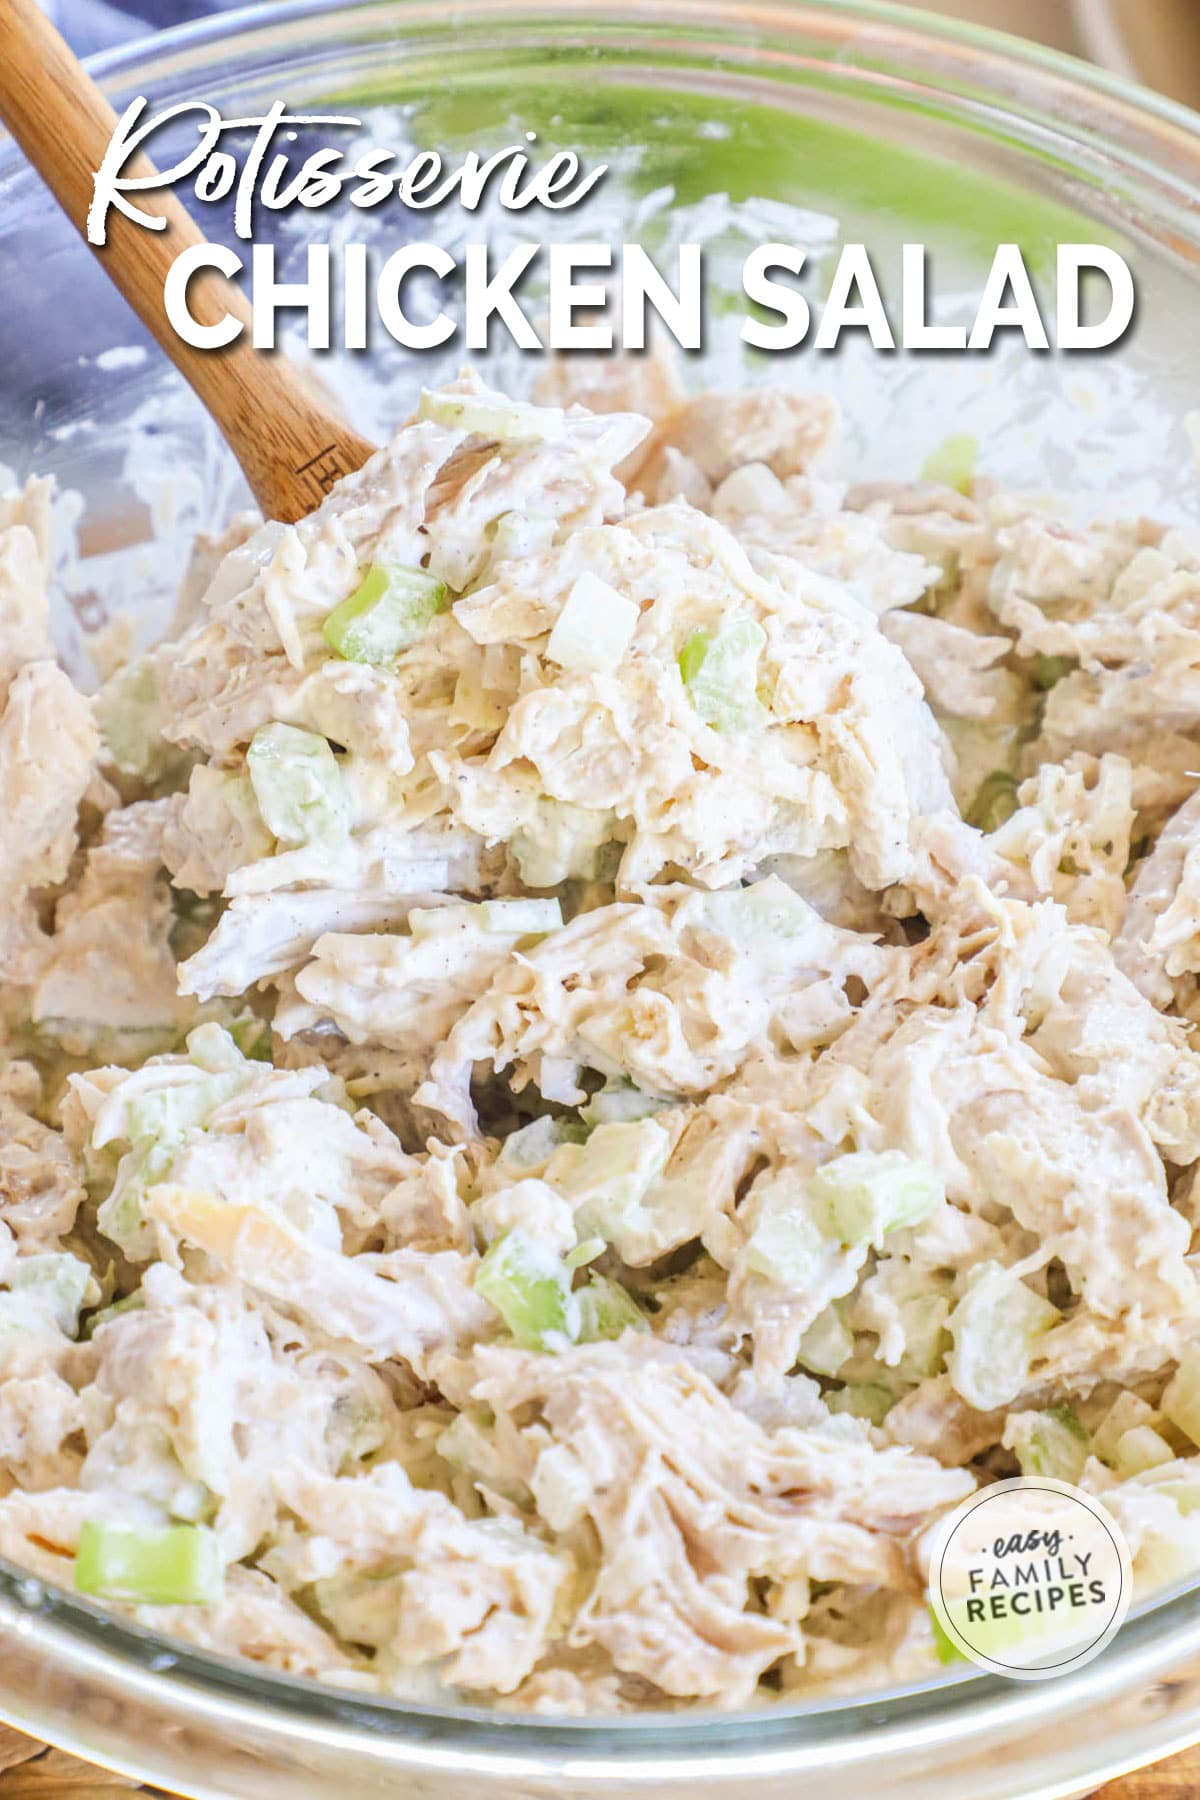 Chicken salad made with rotisserie chicken celery, onion, and mayo mixed in a bowl